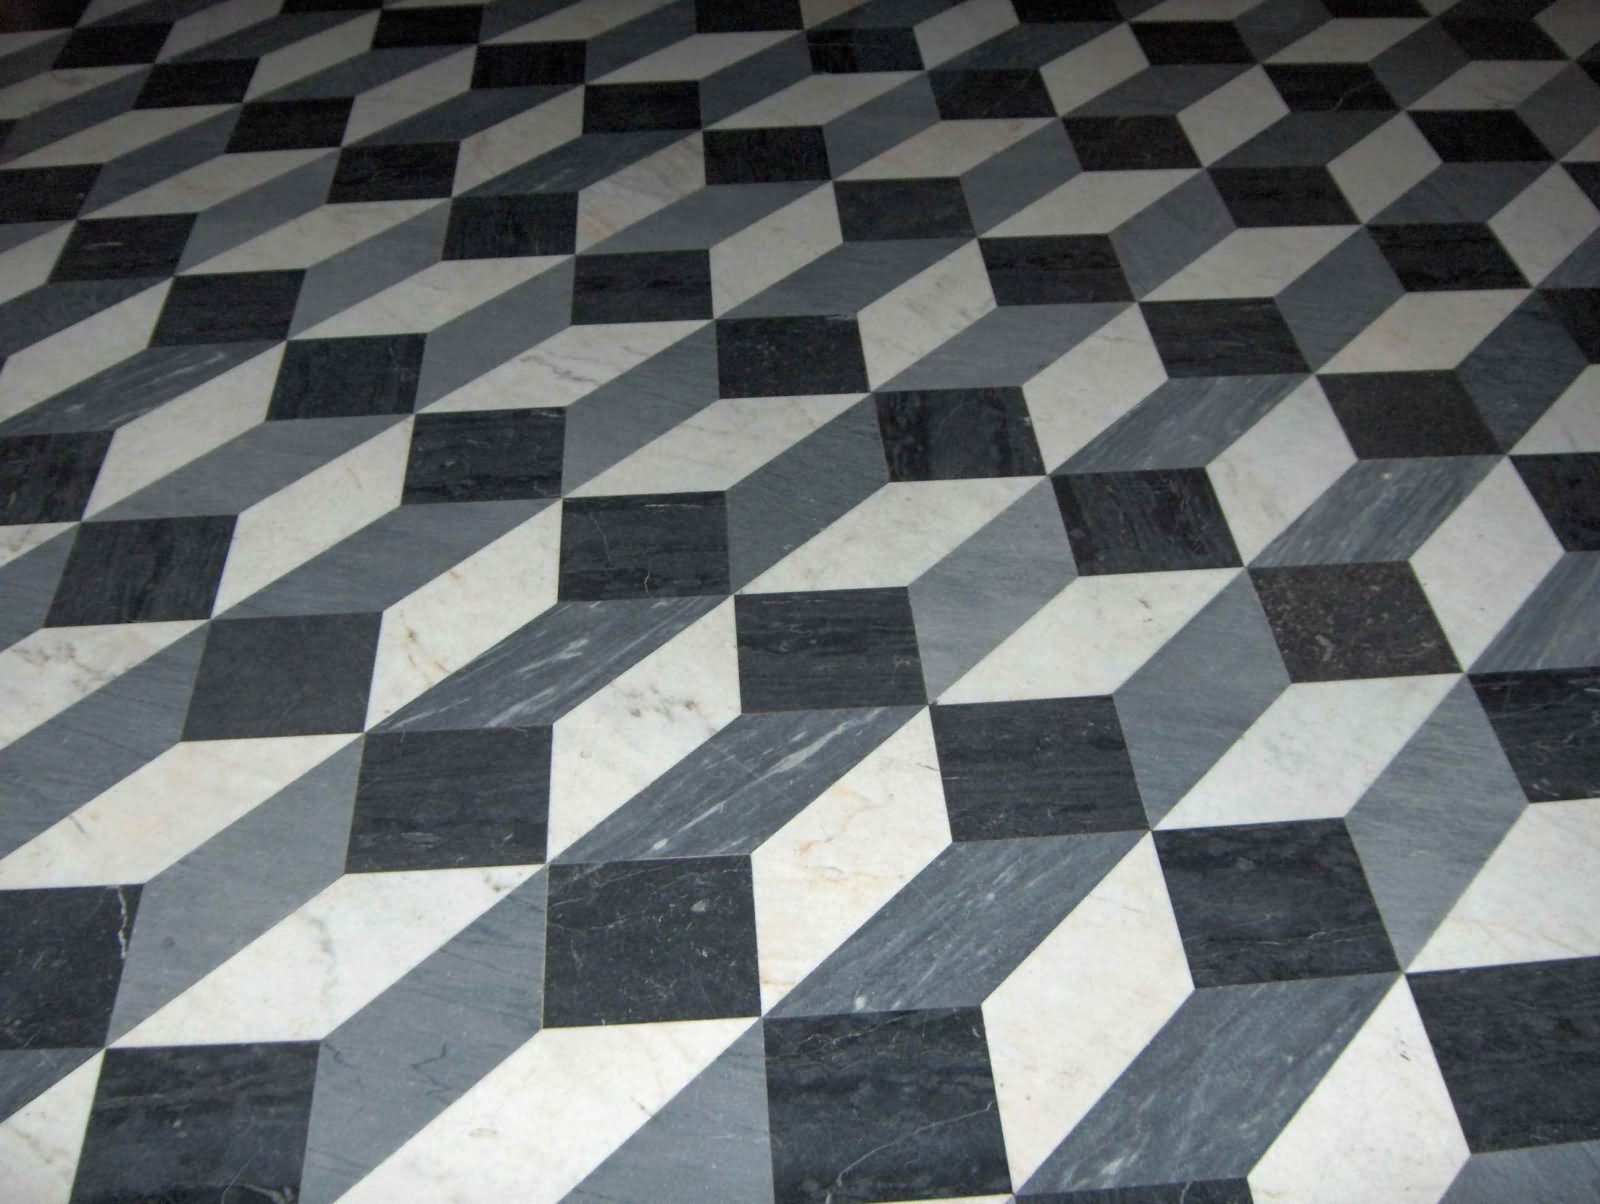 Floor Tiles At The Basilica Of St. John Lateran in Rome Three Dimensional Boxes Optical Illusion